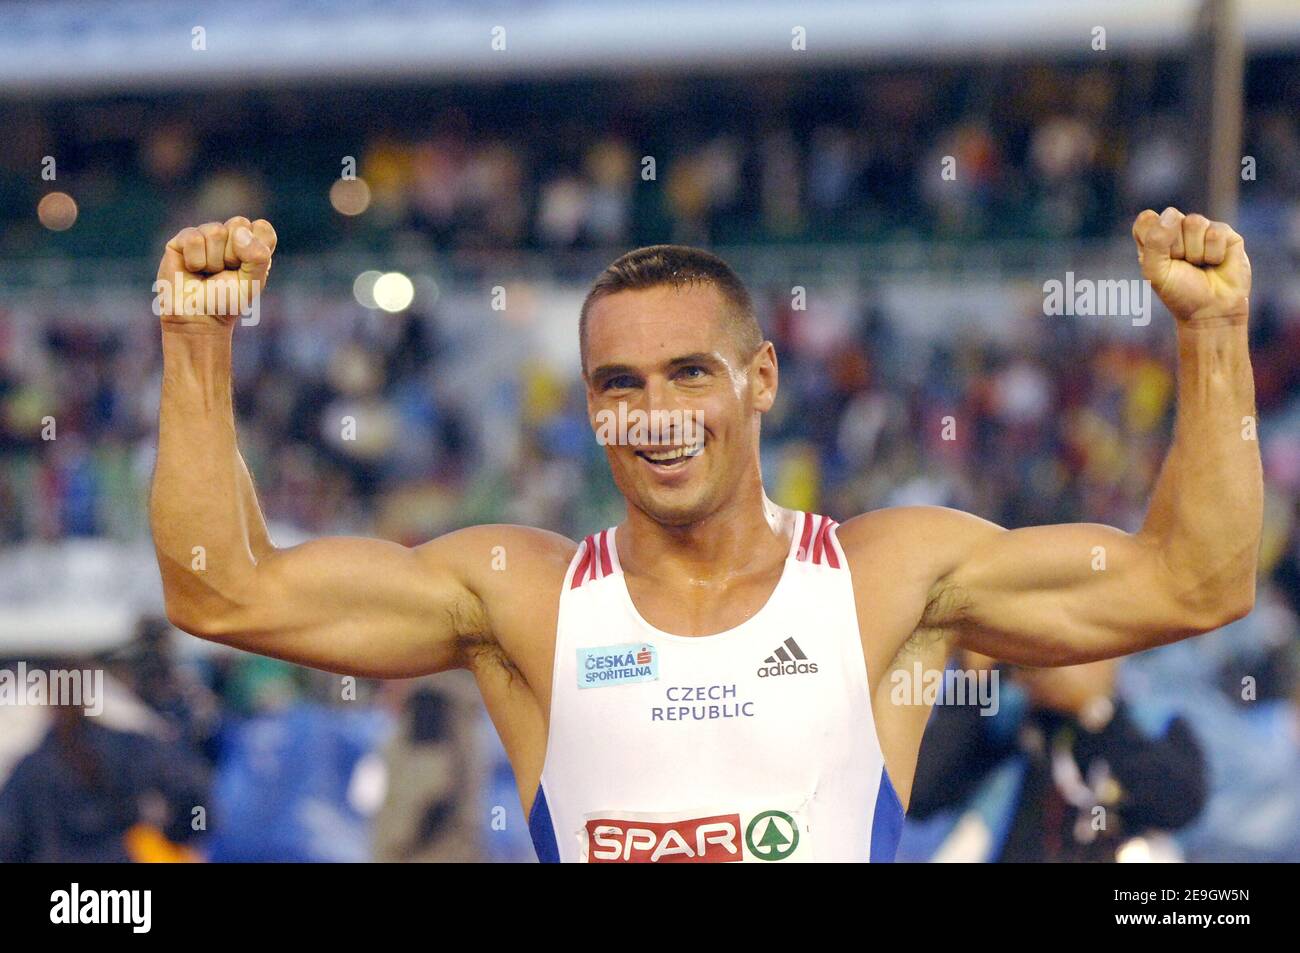 Czech Republic Roman Sebrle celebrates his gold medal decathlon during the  European Track and Field Championships, in Goteborg, Sweden, on August 11,  2006. Photo by Guibbaud-Kempinaire/Cameleon/ABACAPRESS.COM Stock Photo -  Alamy